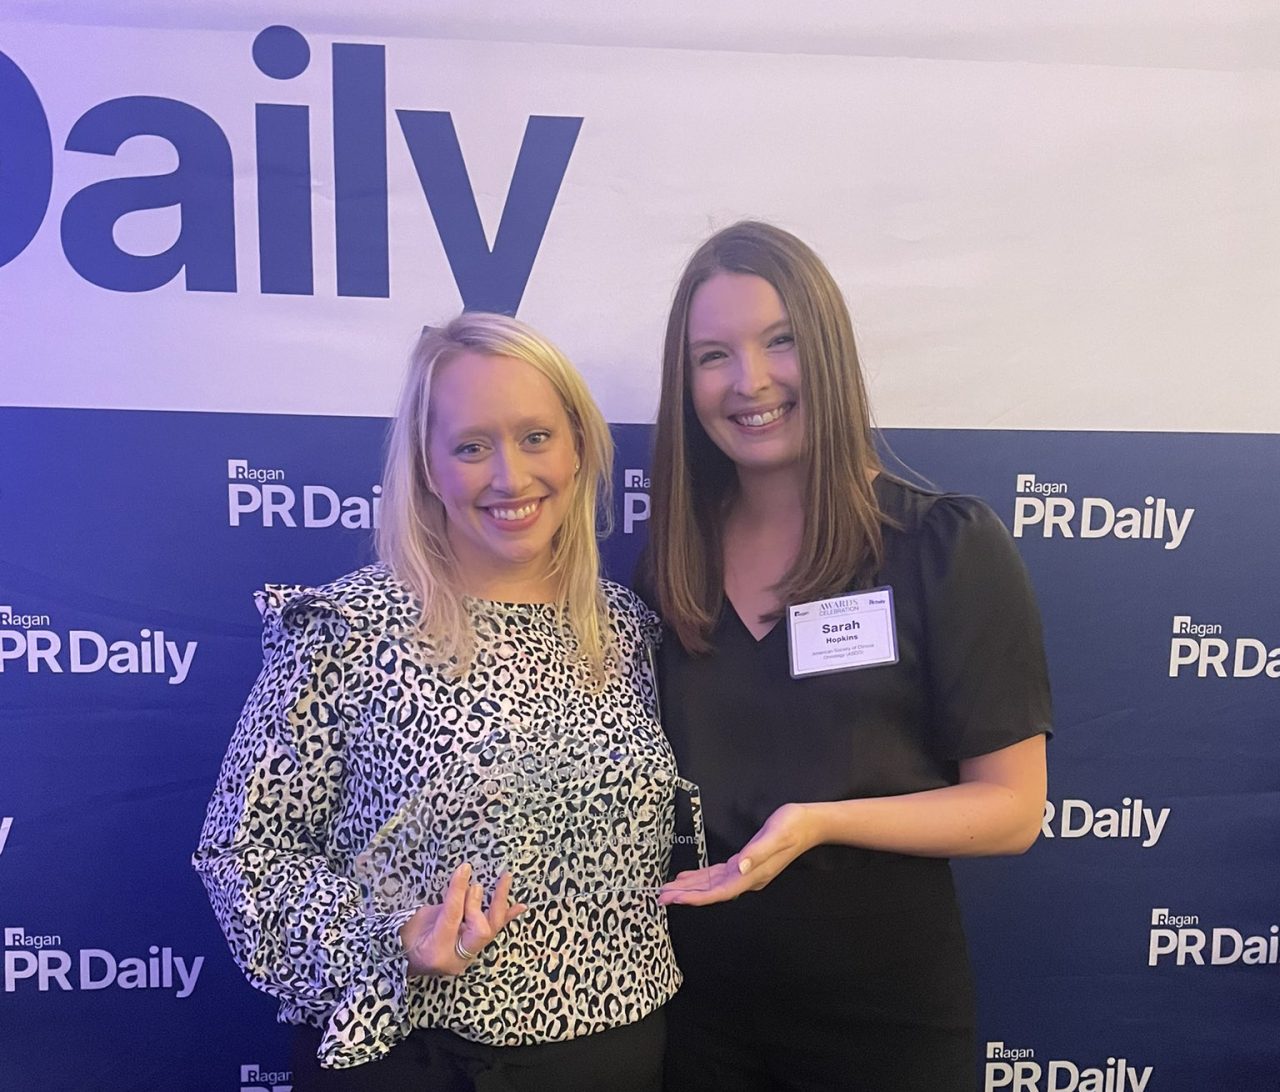 Amanda Narod: Thrilled to share that the American Society of Clinical Oncology’s Featured Voices won PR Daily’s “Innovation in Non-Profit Communication” award today!